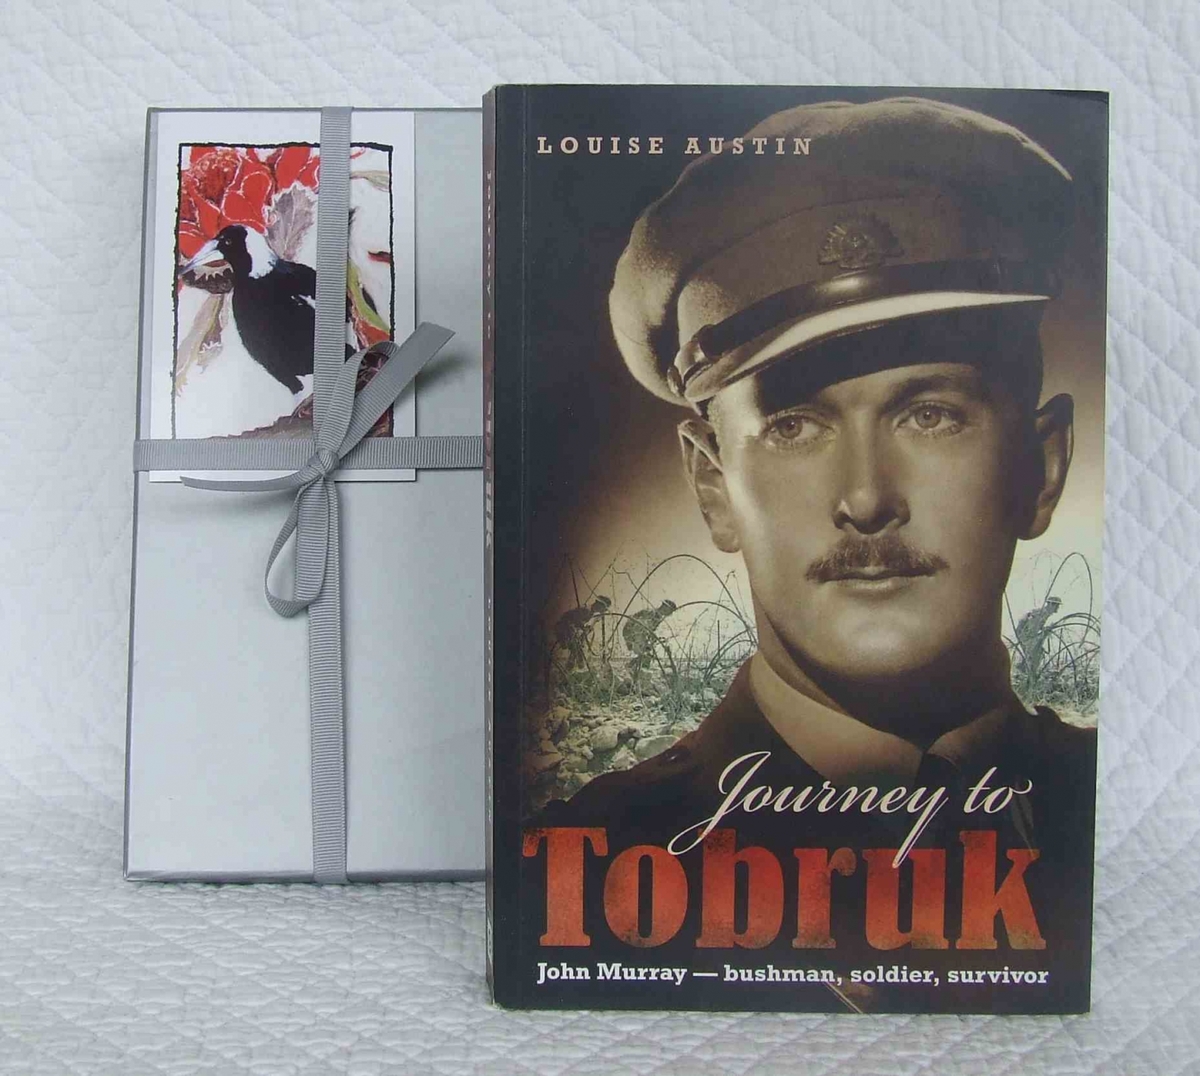 2. Journey to Tobruk by Louise Austin